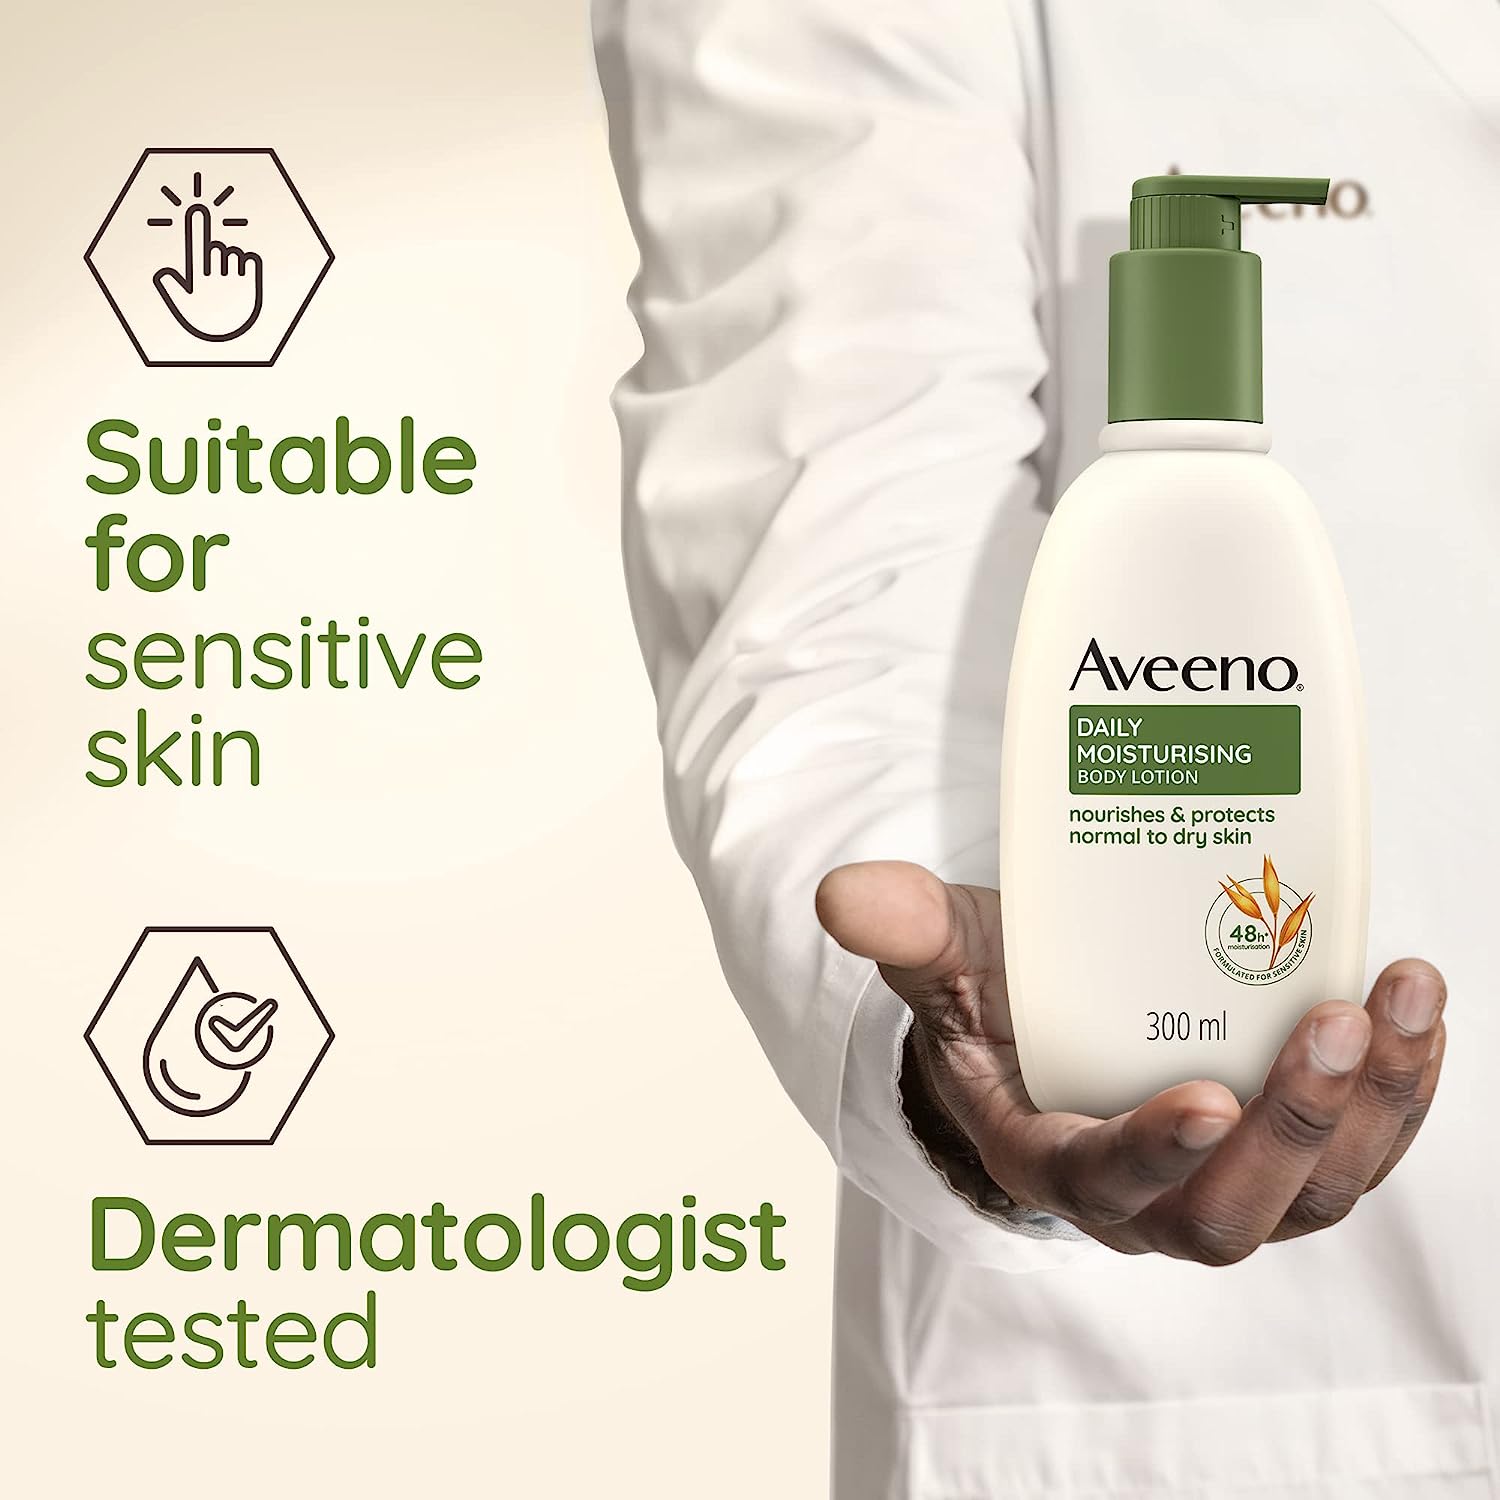 Aveeno Daily Moisturising Lotion For Normal to Dry Skin Care - Prebiotic Oatmeal and Glycerin 24 Hours 300 ml - Healthxpress.ie